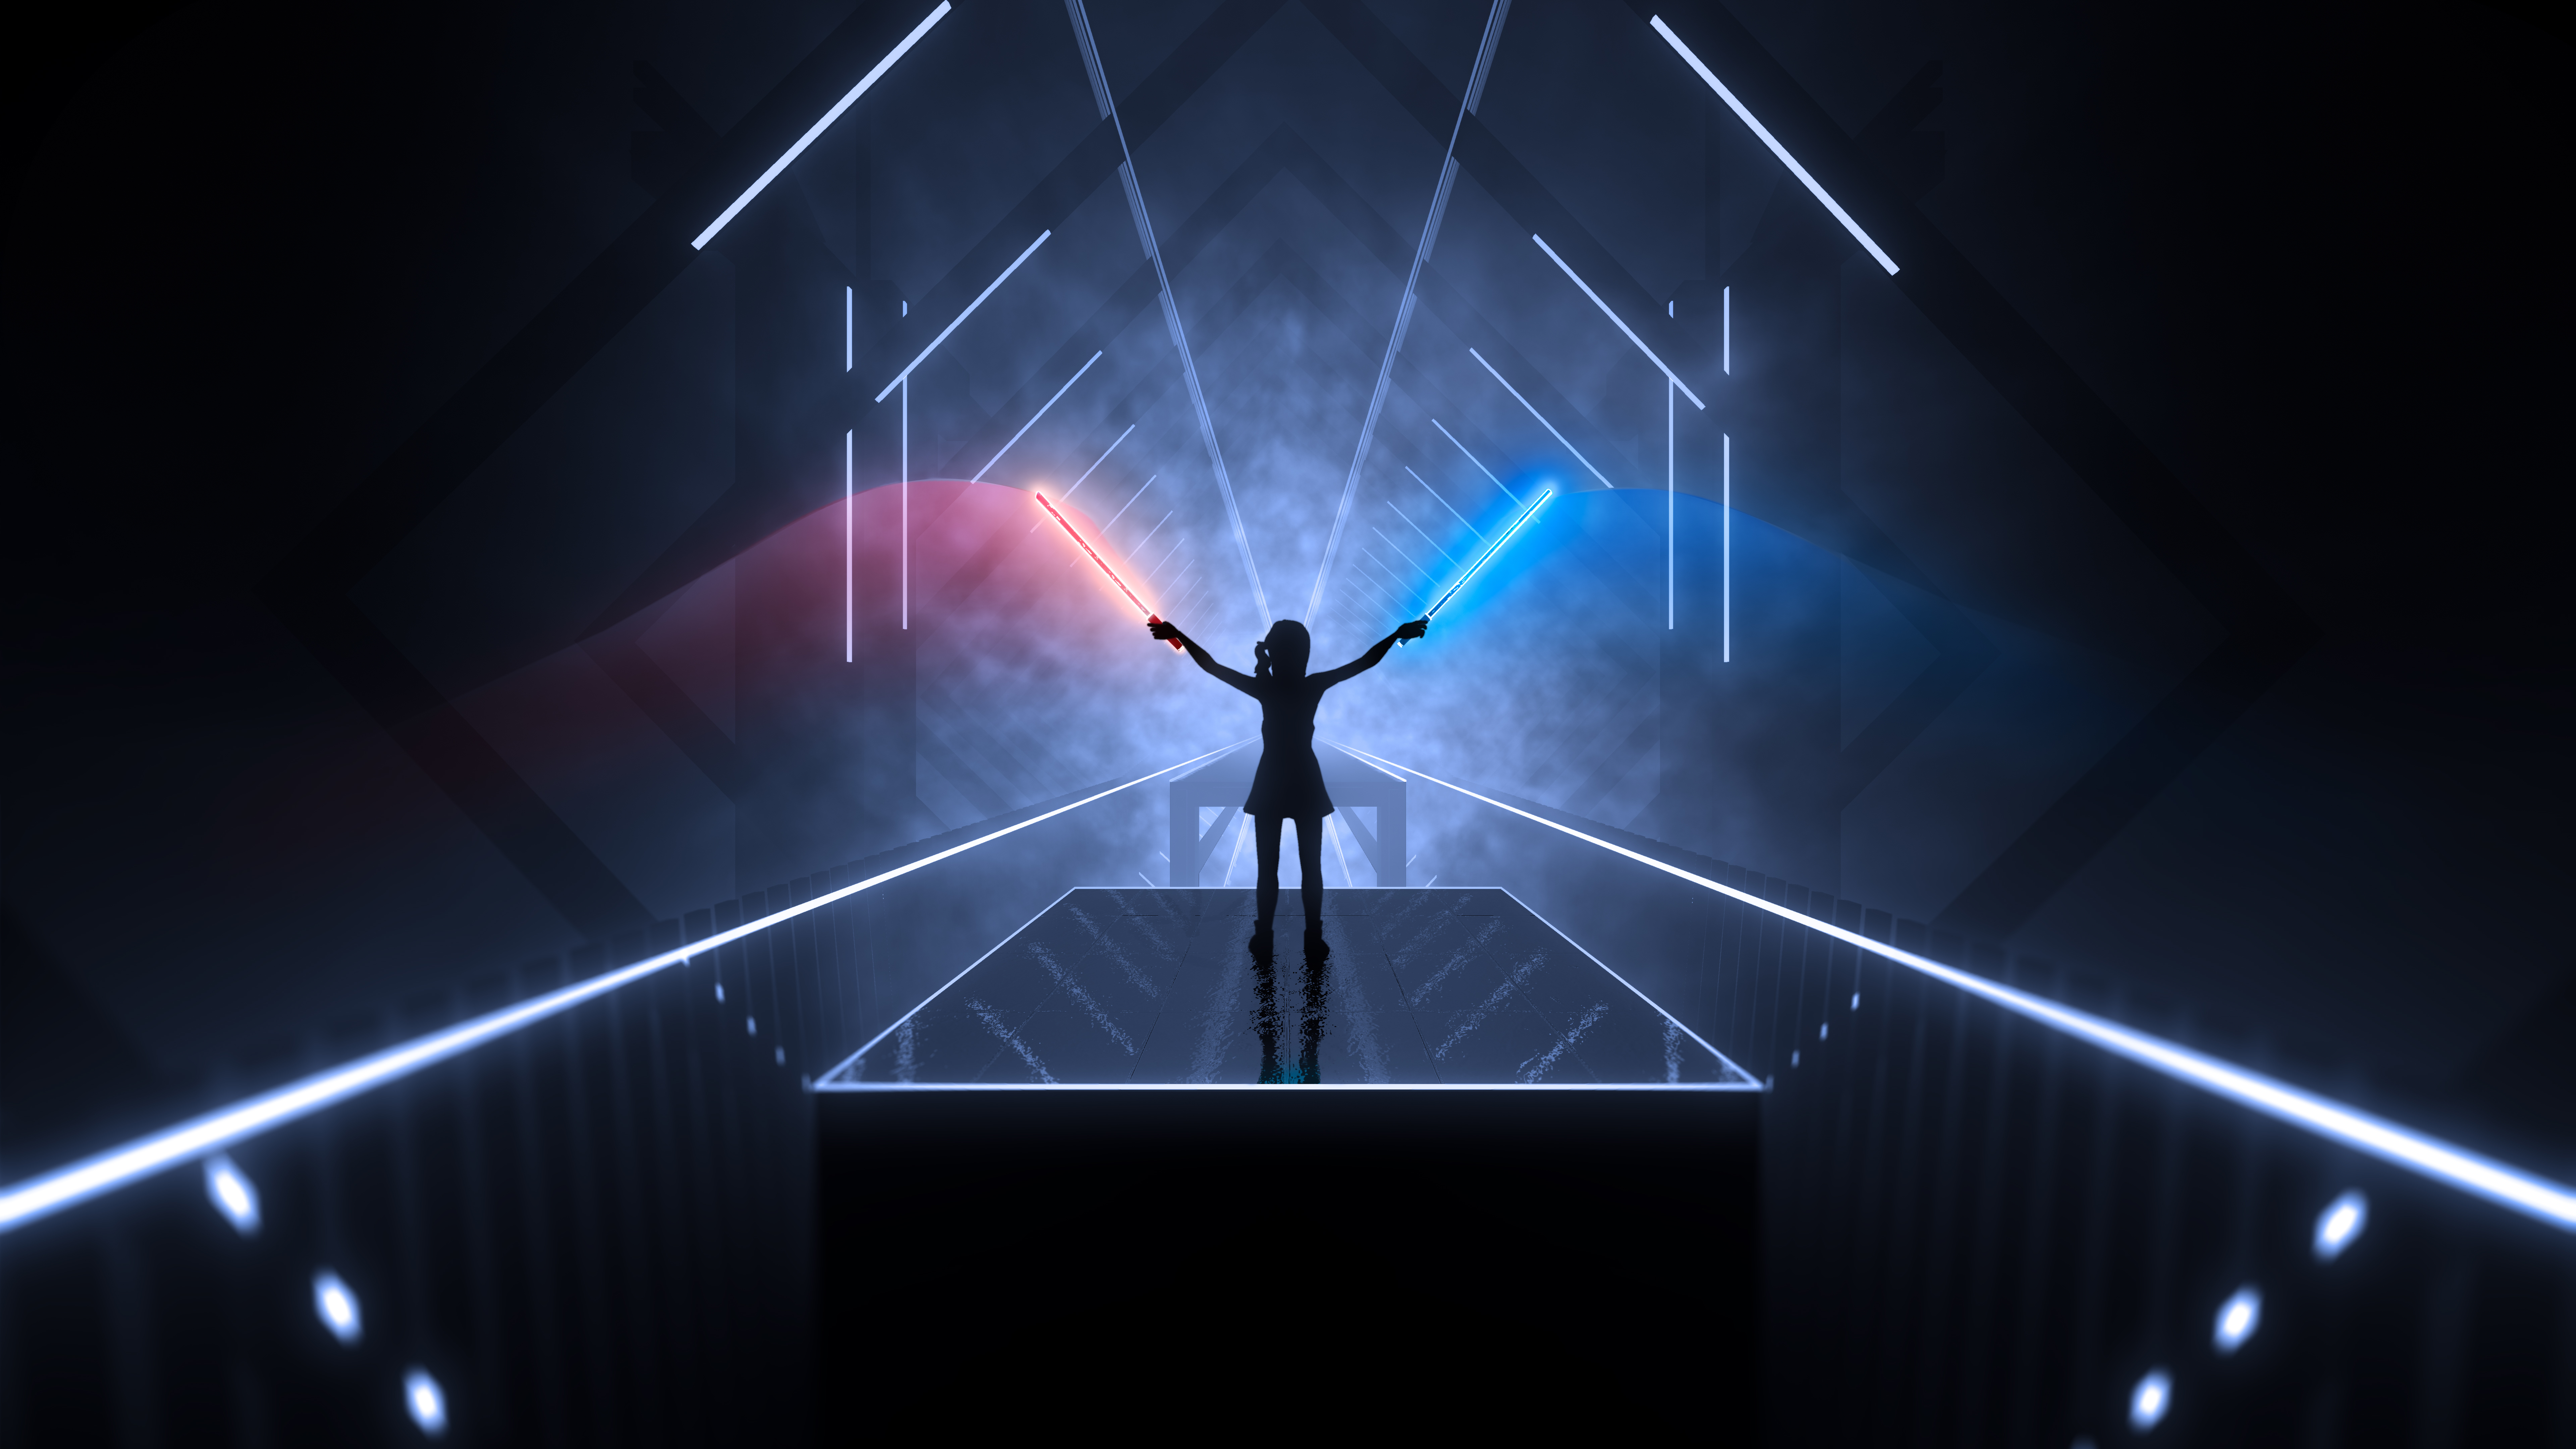 Beat Saber Vr Game Wallpaper Hd Games 4k Wallpapers Images Photos And Background Want to discover art related to beat_saber? wallpapersden